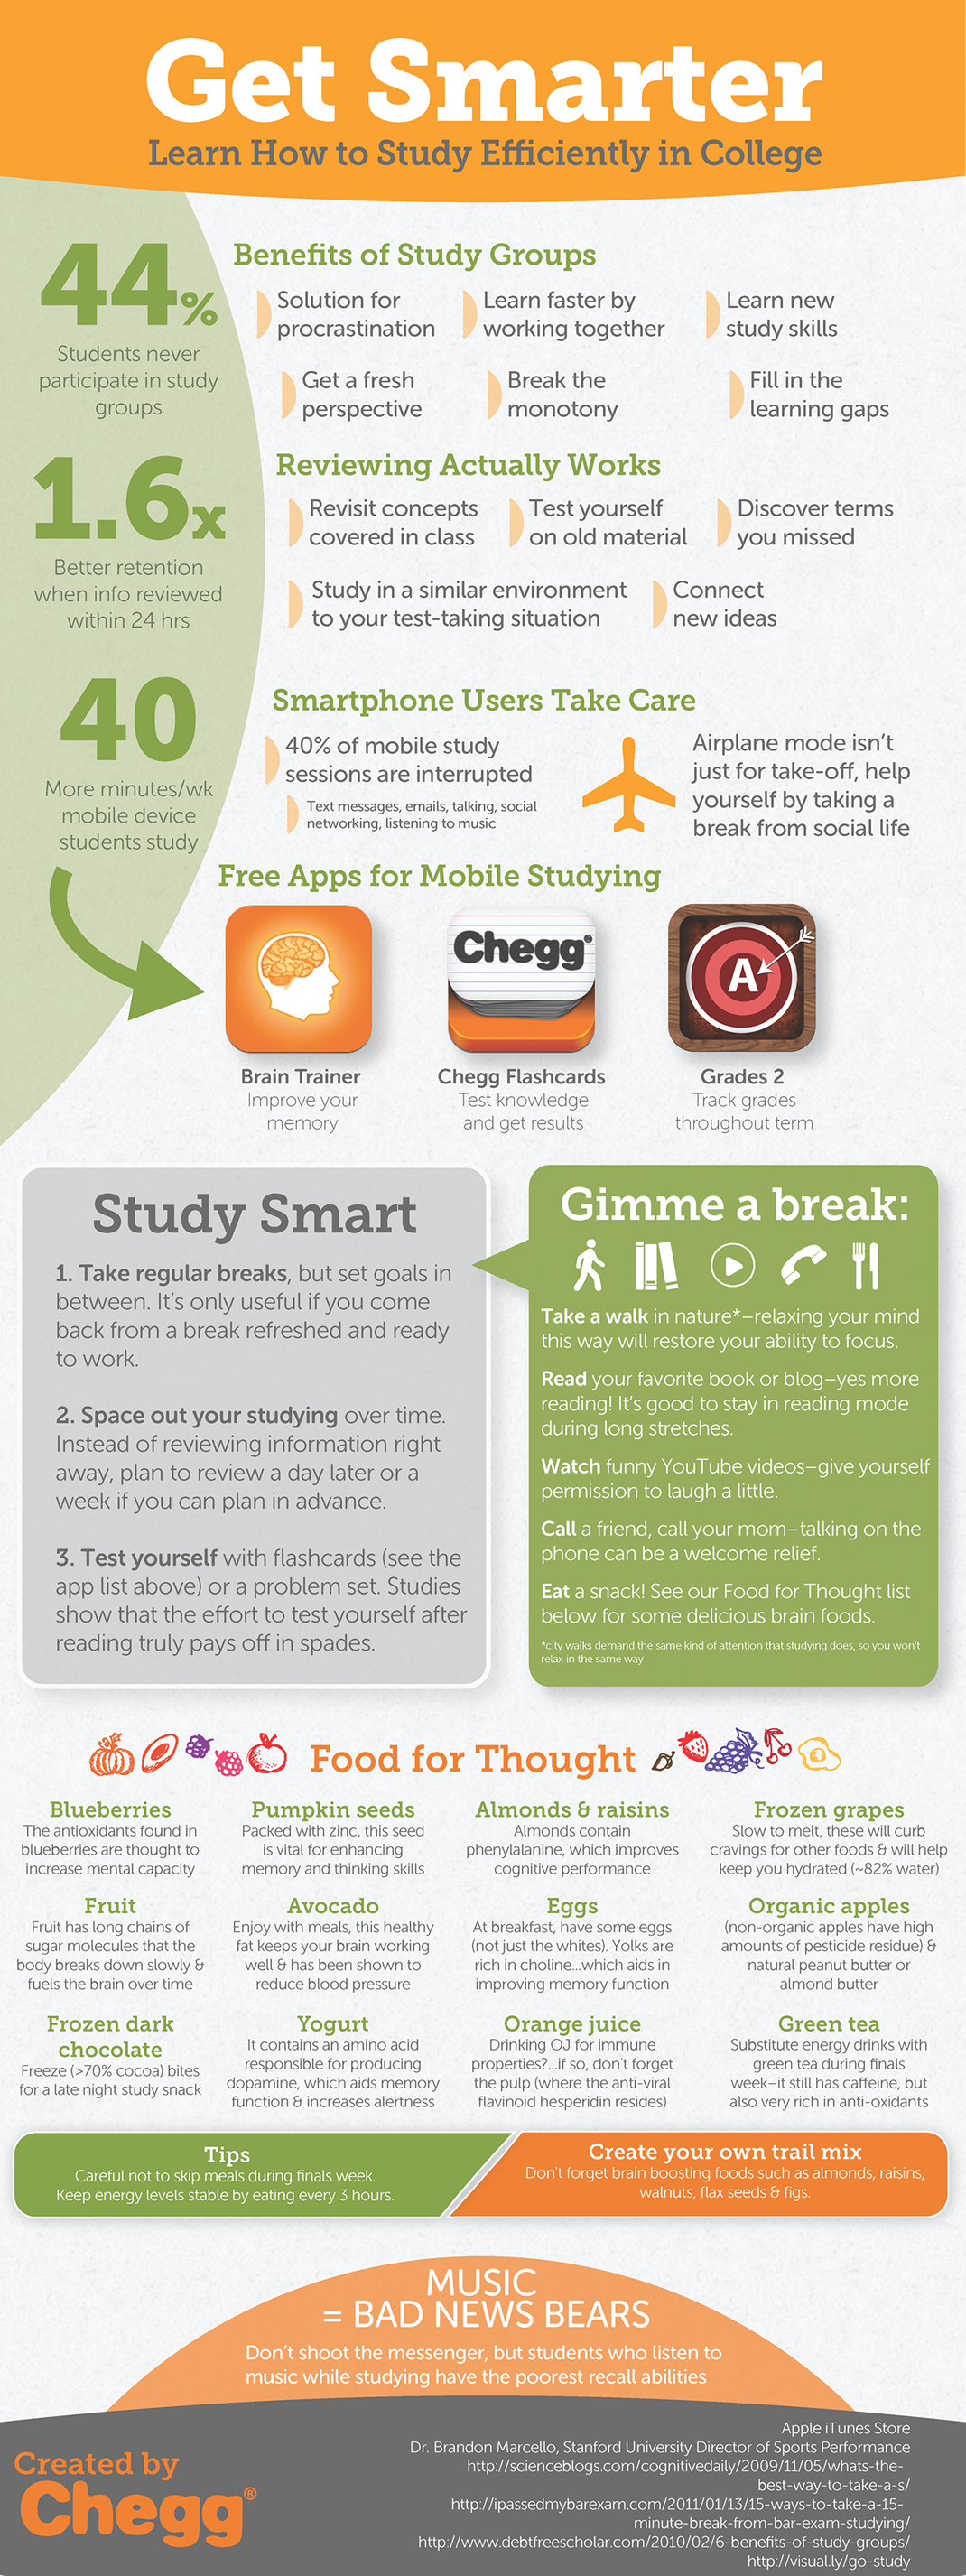 [INFOGRAPHIC] Learn How to Efficiently Study in College | Chegg Blog